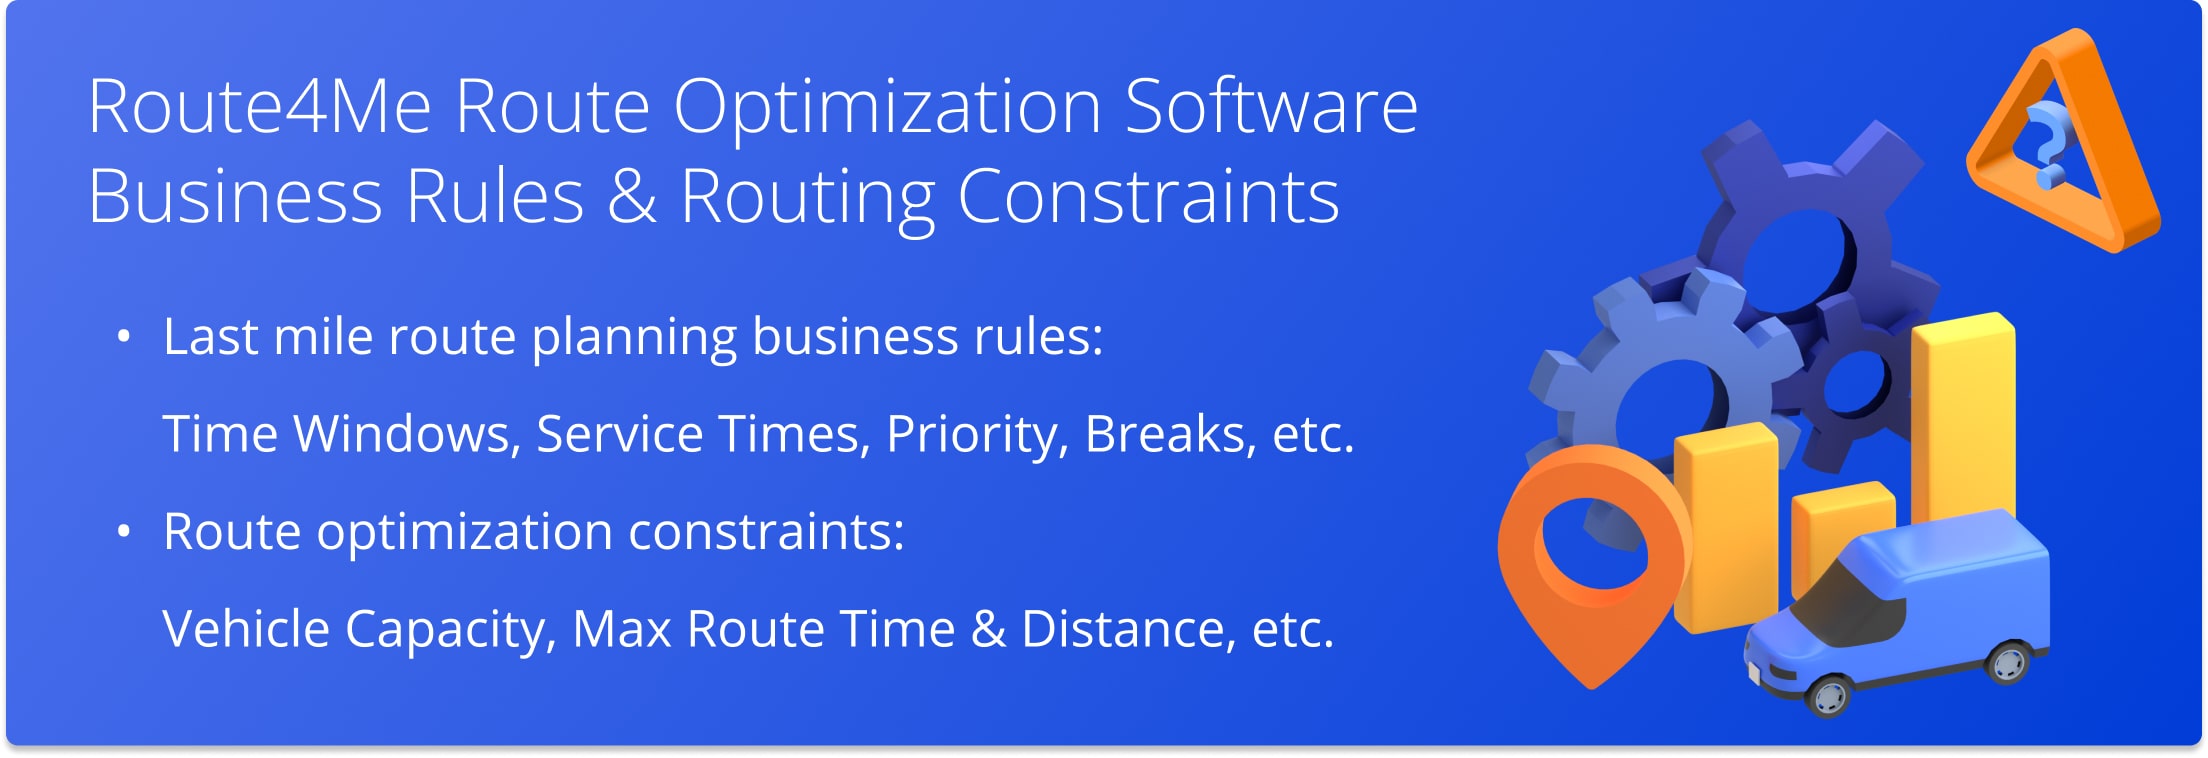 Route4Me Route Optimization Software Business Rules and Routing Constraints: Time Windows, Max Route Distance and Duration, Custom Data, Service Times, and more.